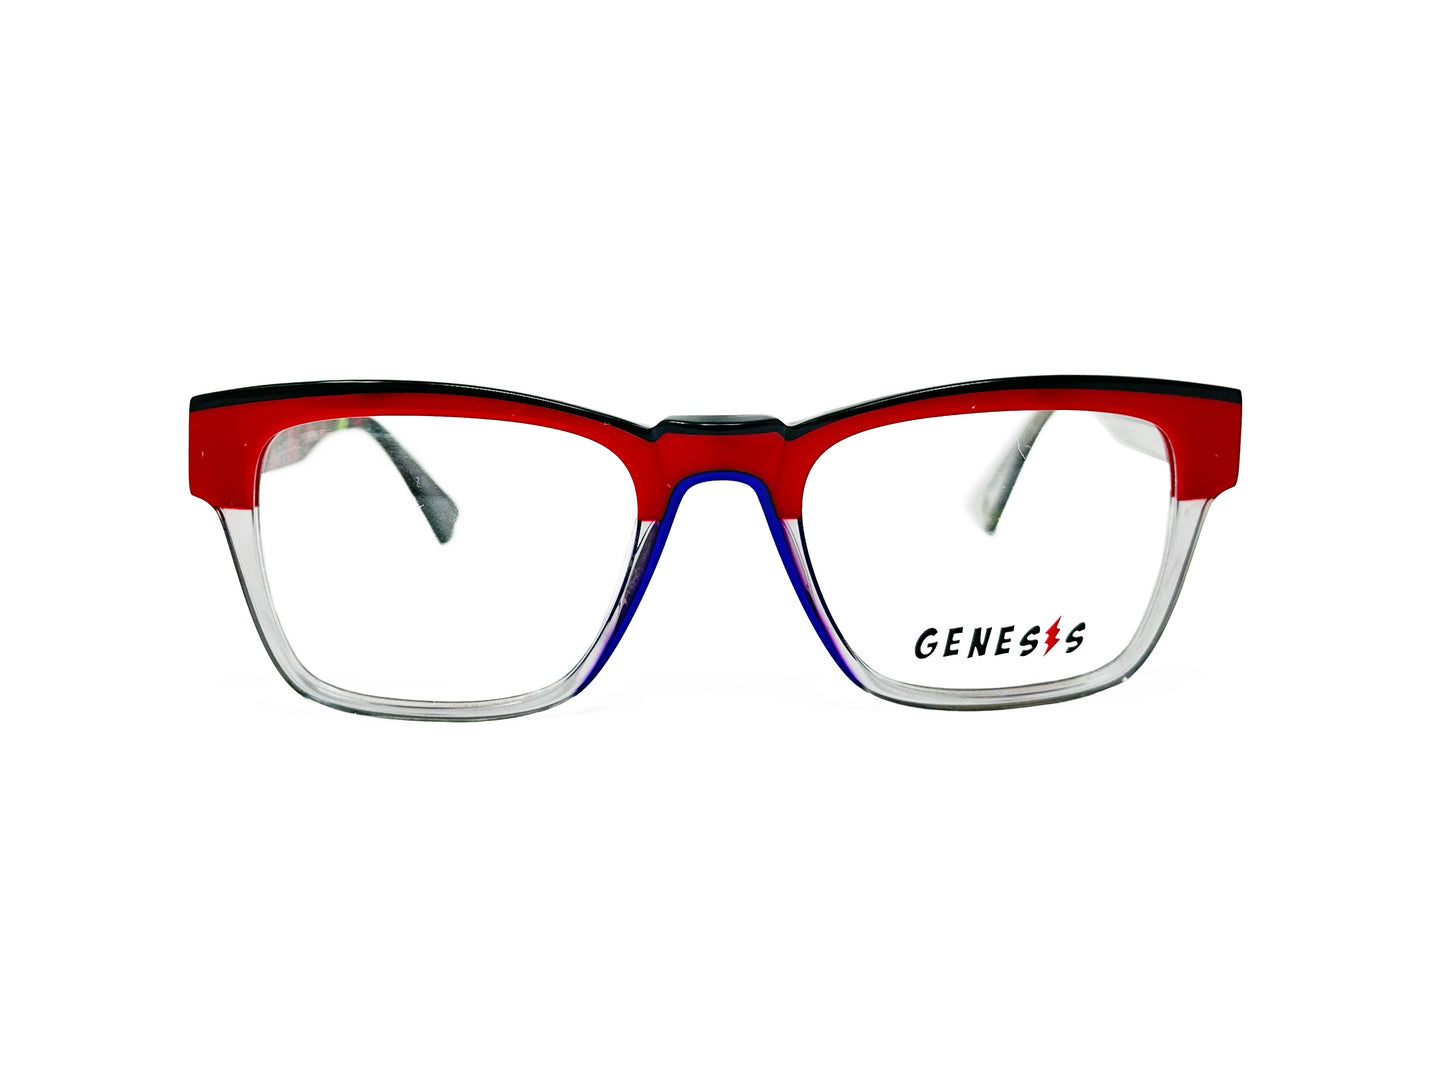 Genesis square, acetate optical frames with a raised bridge. Model: GV1536. Color: 6 - Red with black lining on top and clear transparent on bottom with blue lining along bridge. Front view. 